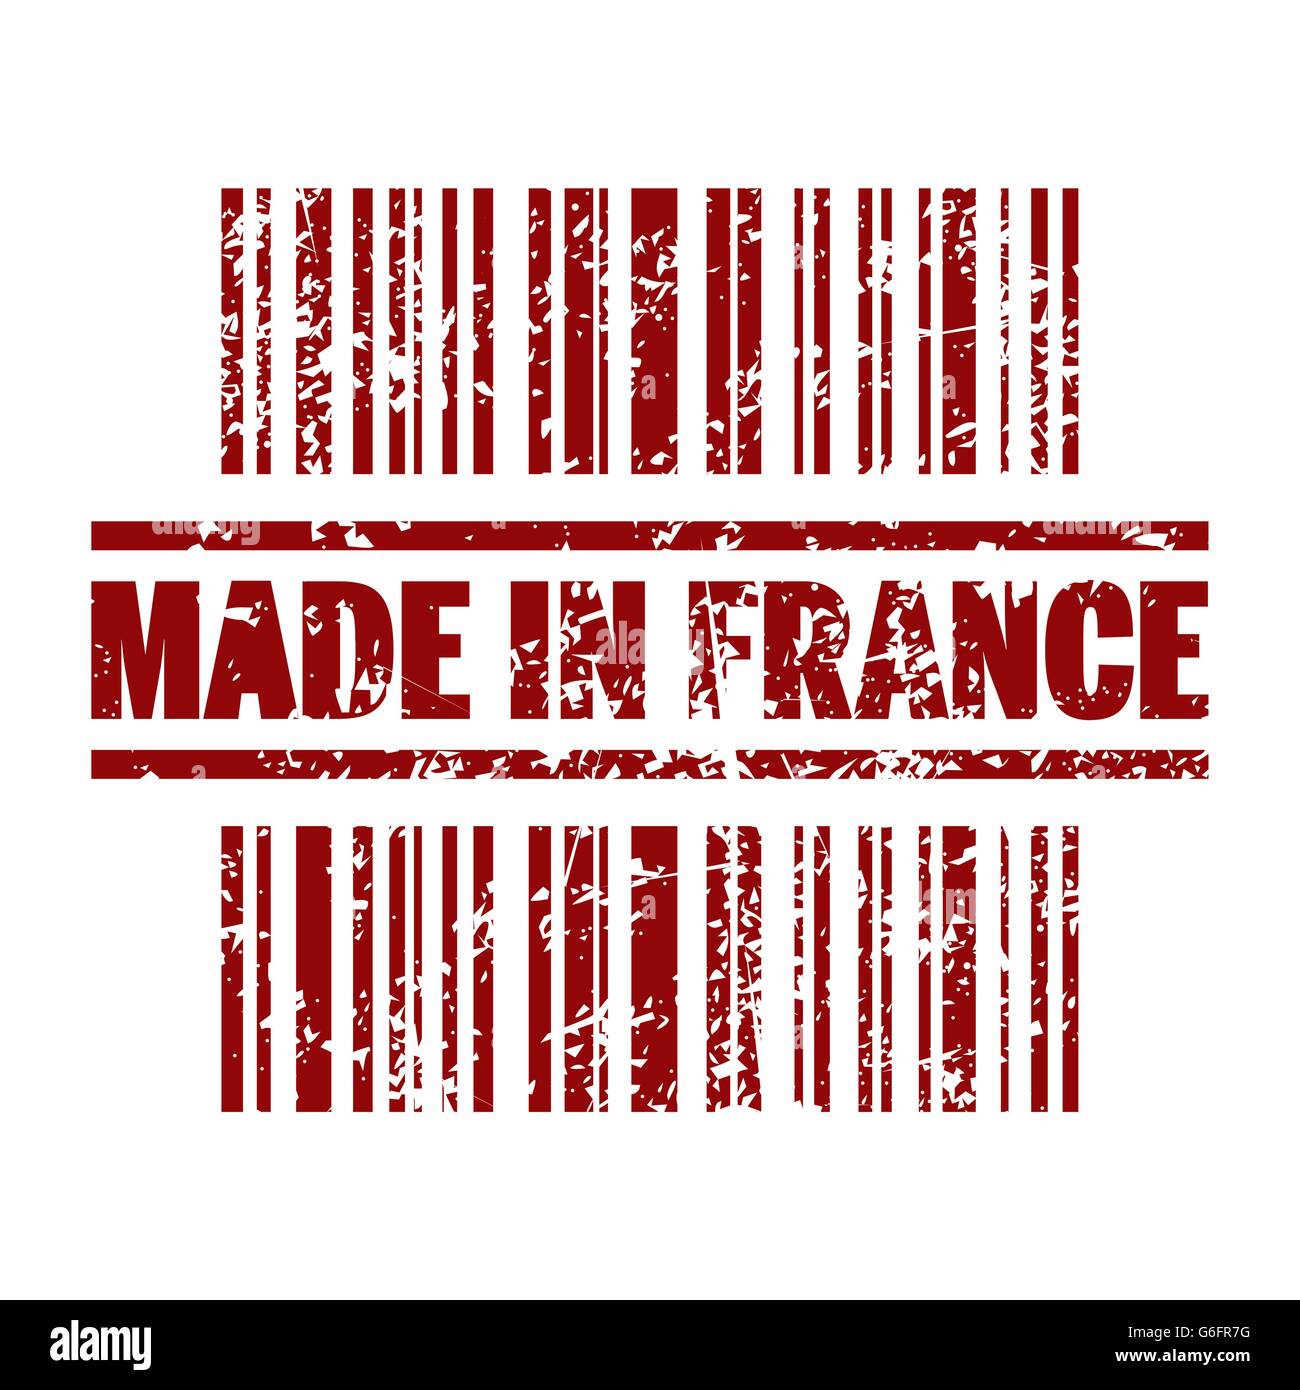 Made In France Icon Stock Illustration - Download Image Now